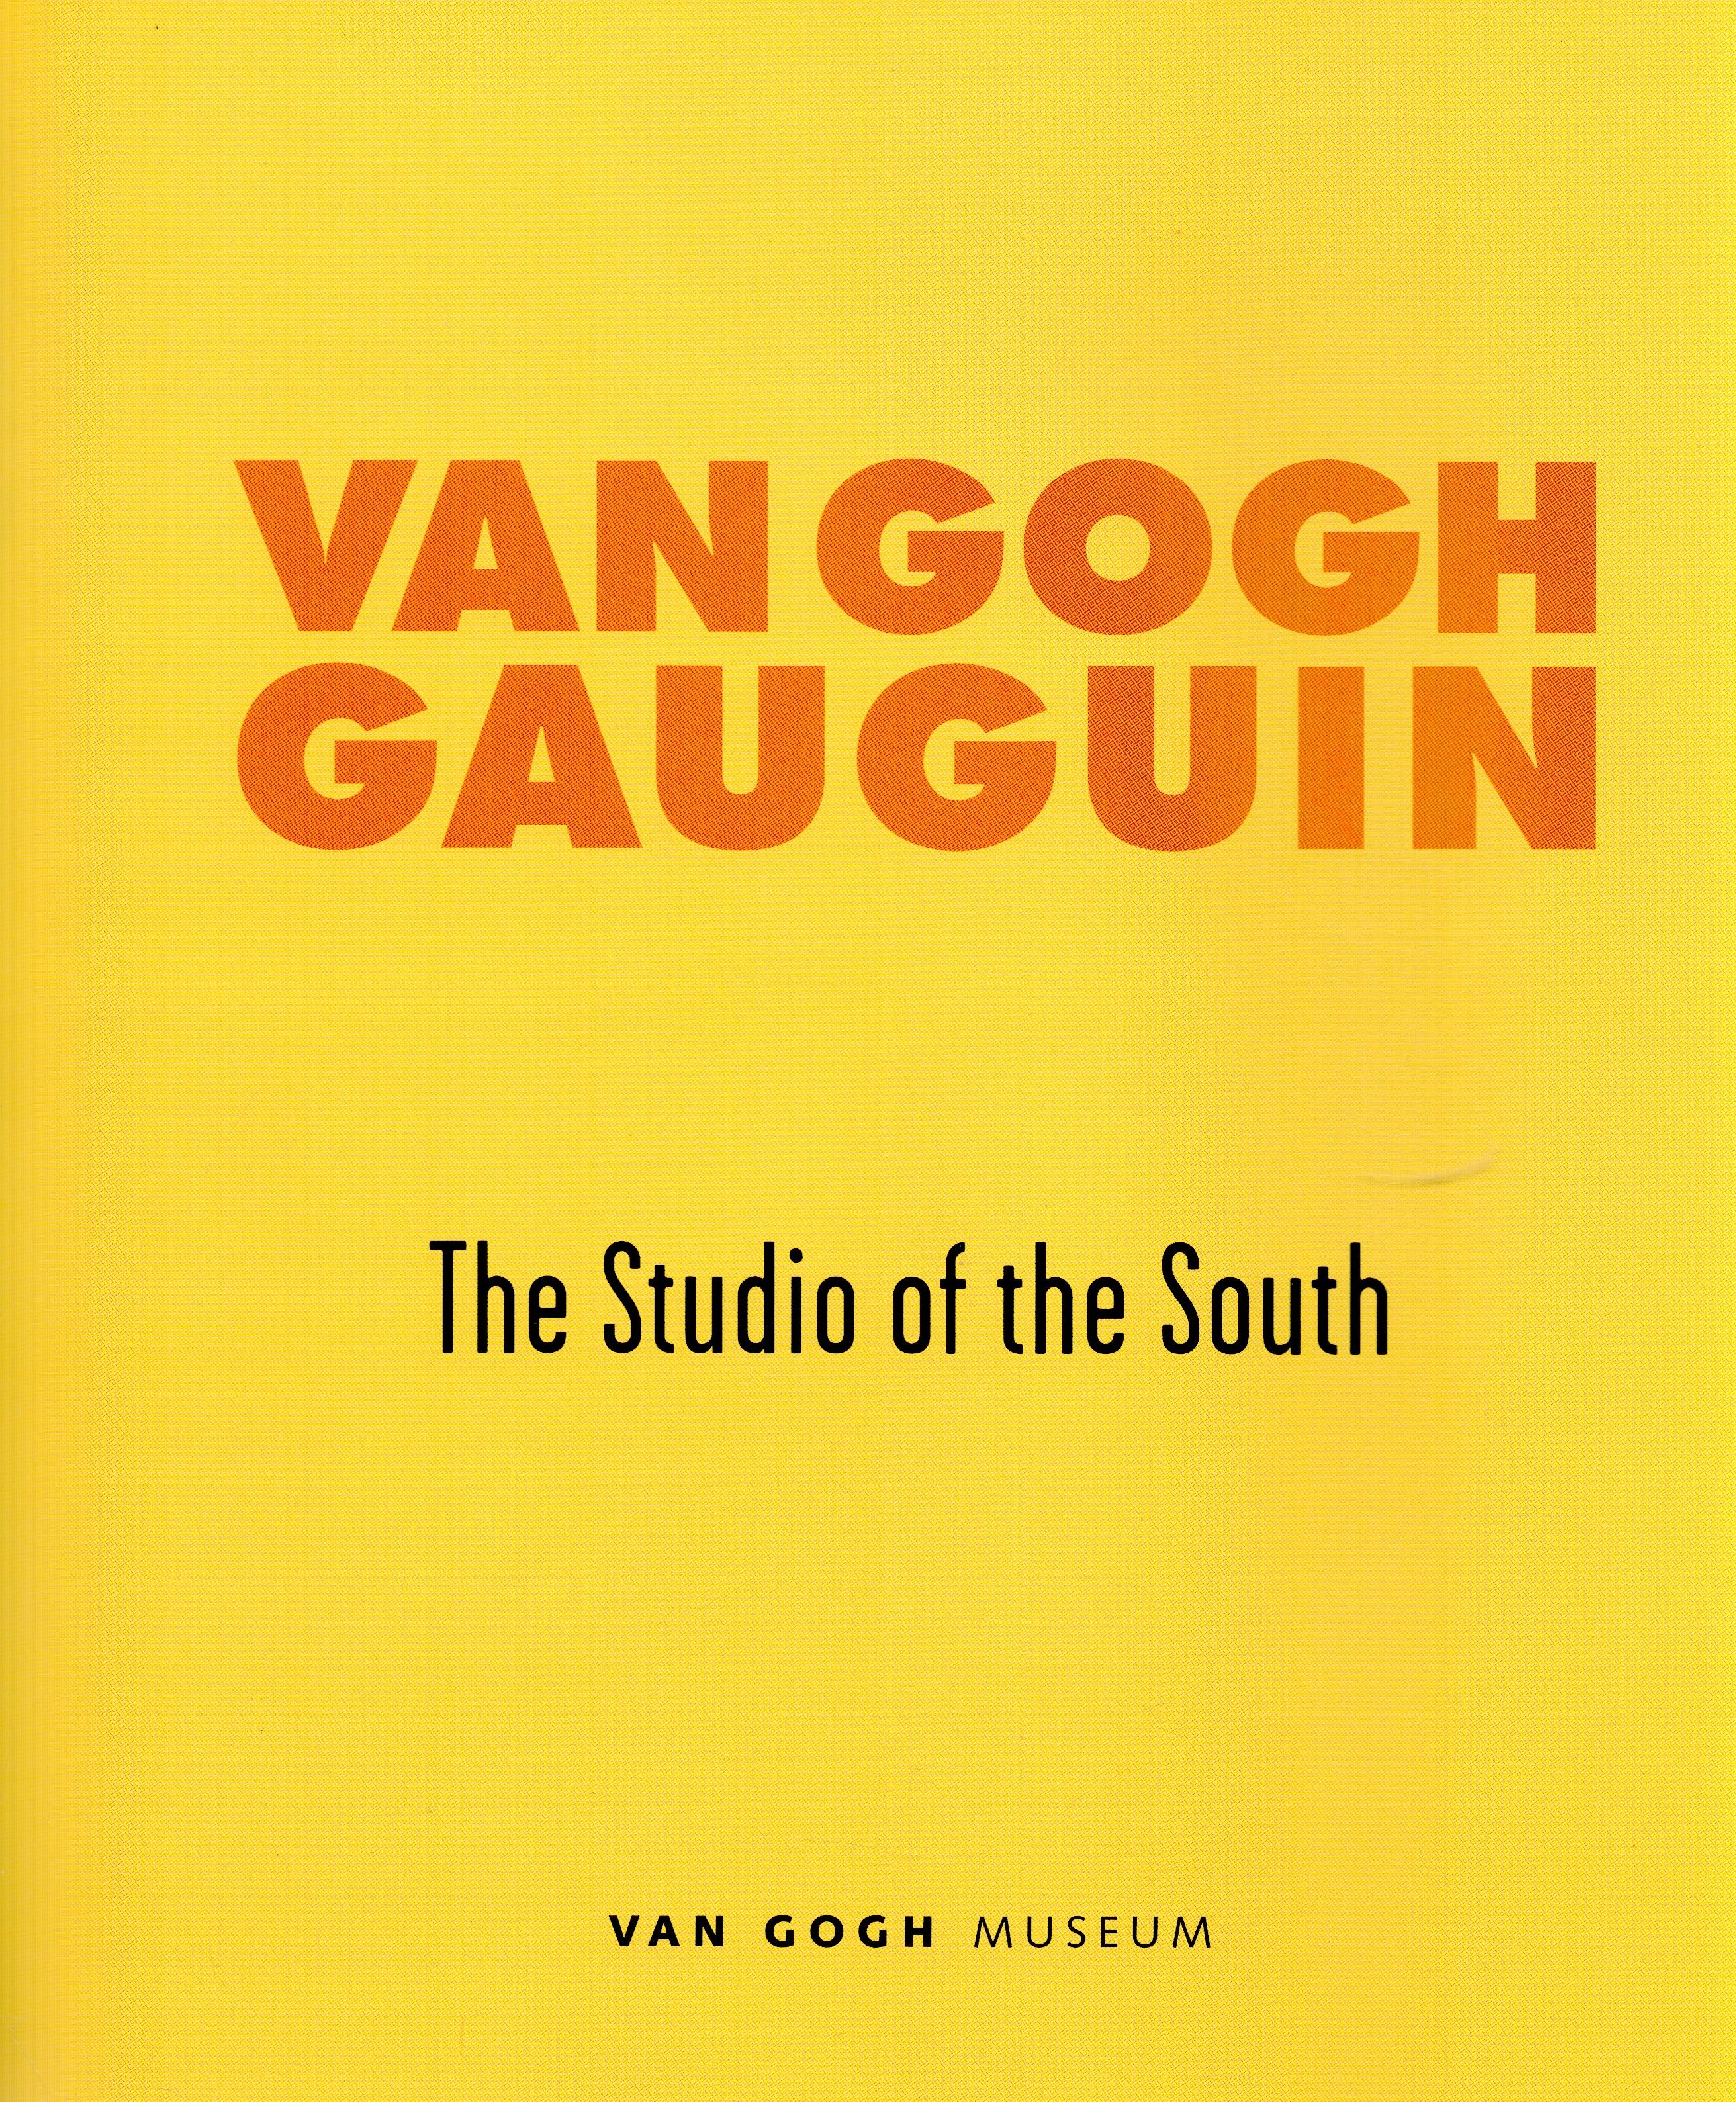 The Studio of the South Van Gogh Gauguin Softback Book 2001 First Edition published by The Van - Image 2 of 3